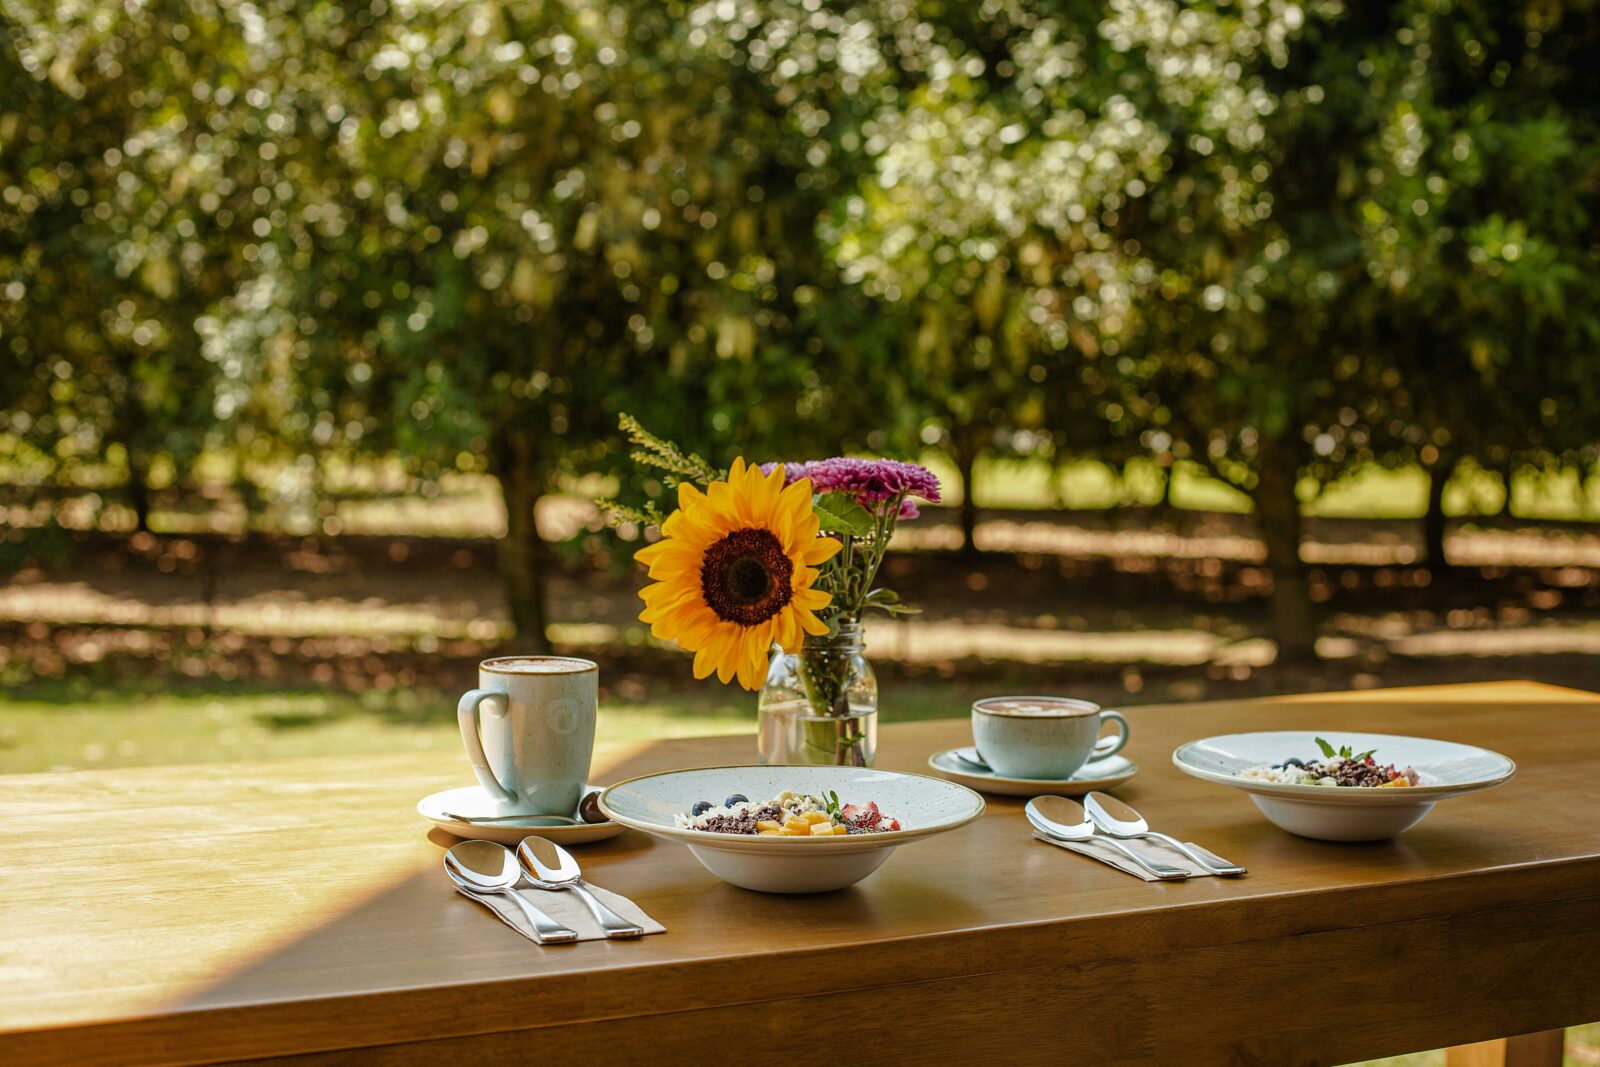 The Orchard Table's picturesque setting